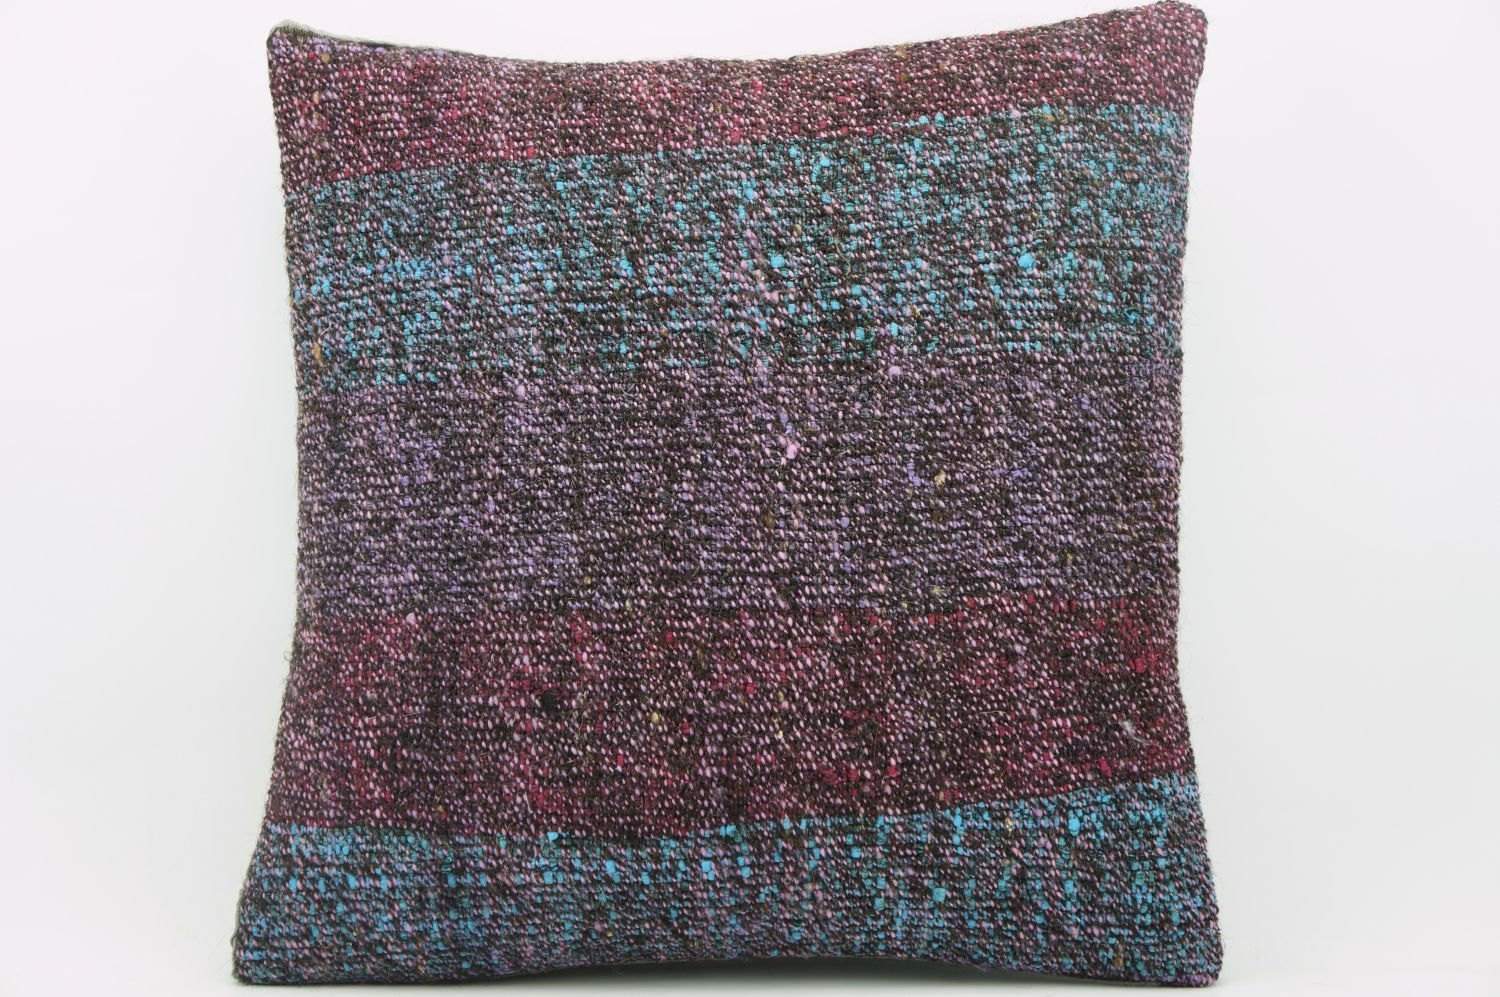 CLEARANCE 16x16 Vintage Hand Woven wool purple green red  gradient colour Kilim Pillow  cushion 1029_A Wool cushion - kilimpillowstore
 - 1